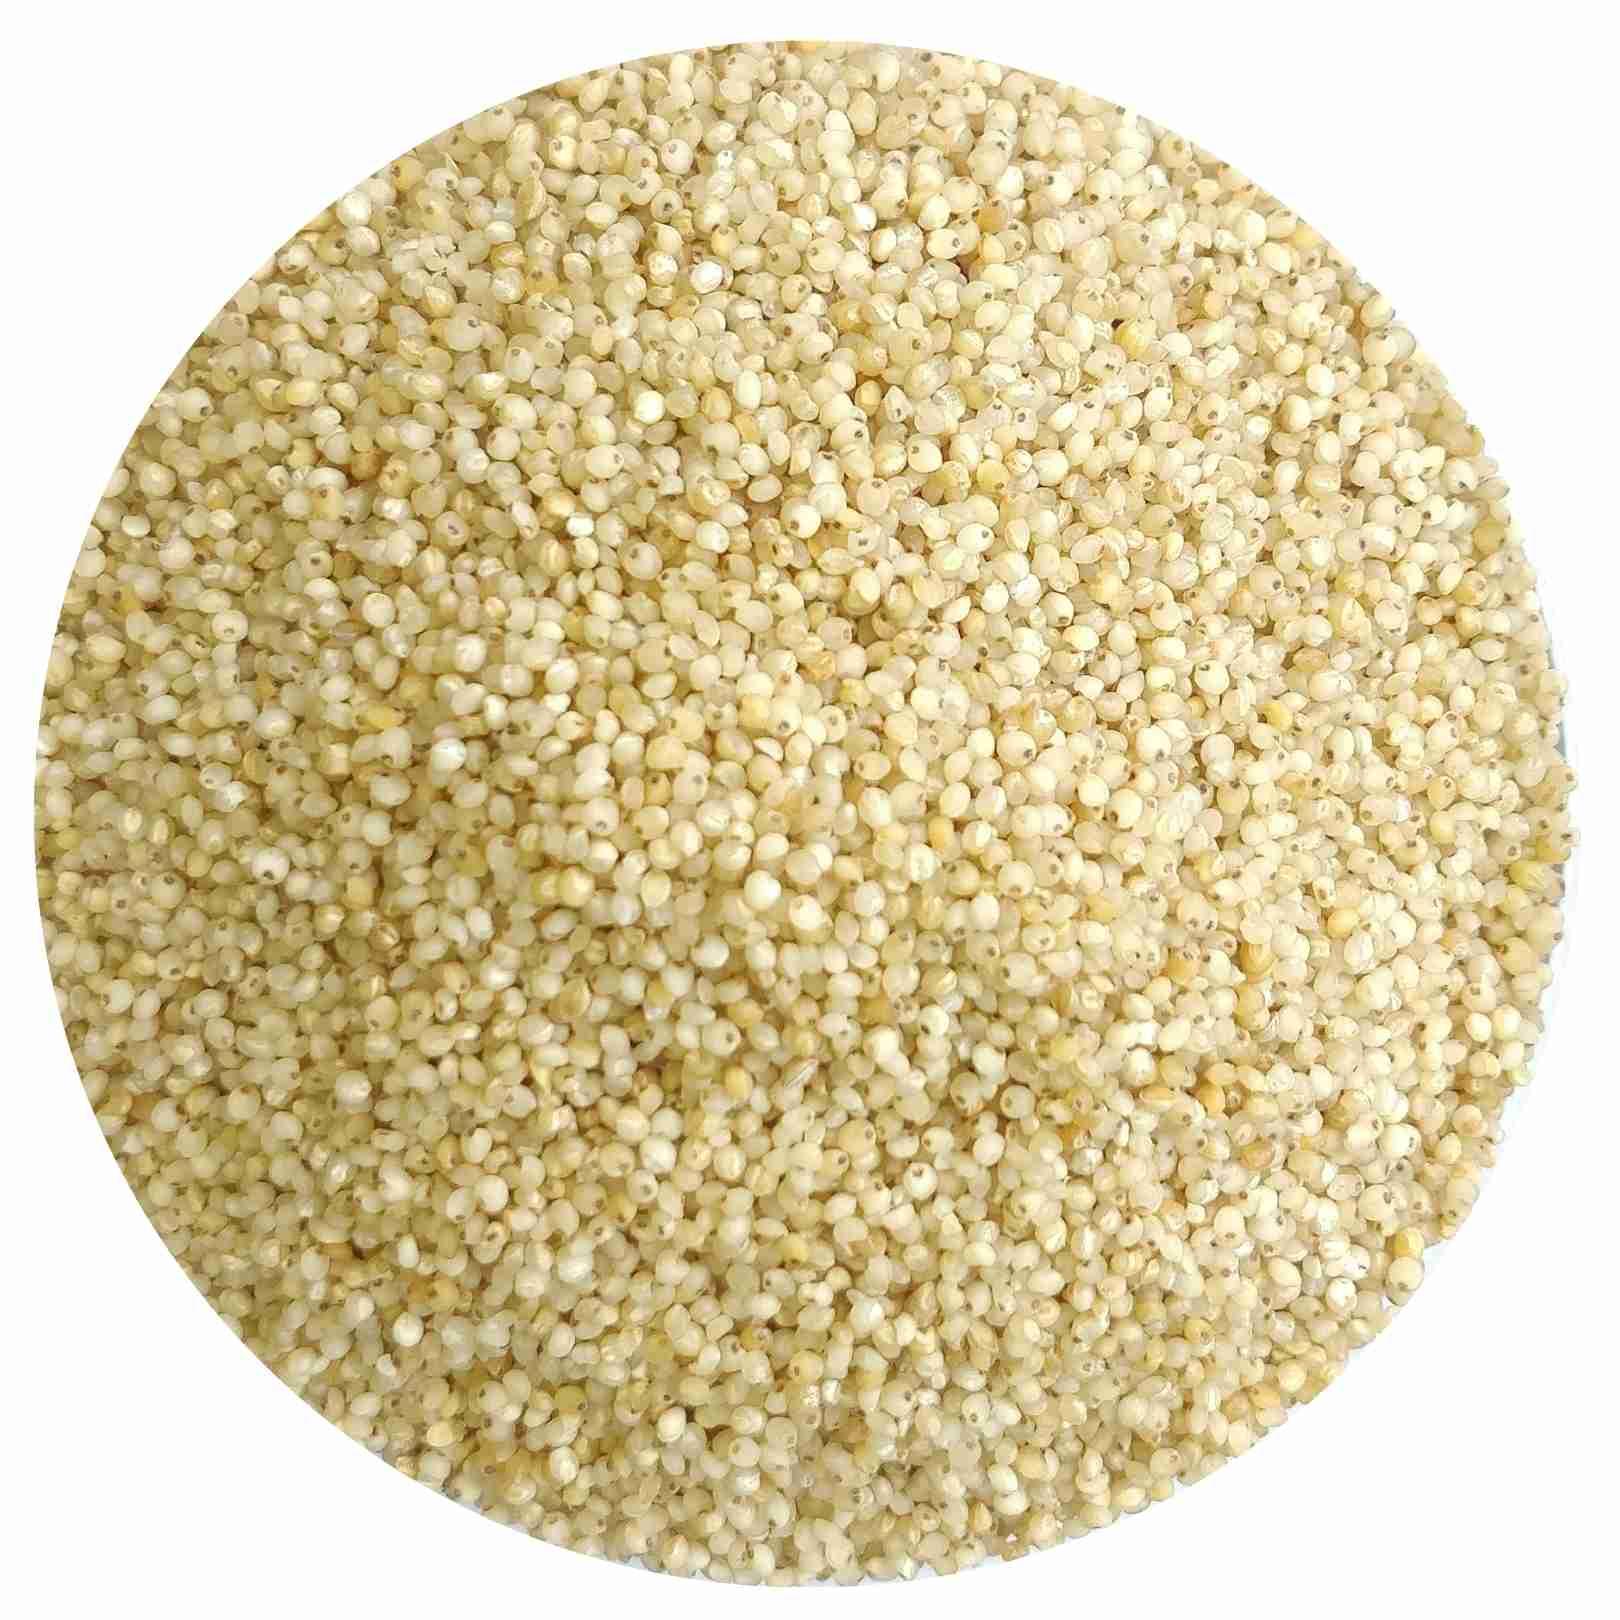 Millet Amma’s Organic Barnyard Millet Grains- Millet Amma’s Organic Barnyard Millet Grains are a rich source of dietary fibers.  Sourced with premium unpolished Barnyard Millets, it is a good source of fiber, iron, zinc and potassium.  Barnyard Millet is a known replacement for rice, you can use it to make all the dishes you normally use rice for. It is an ideal option for people following a millet diet; it also aids in weight management.